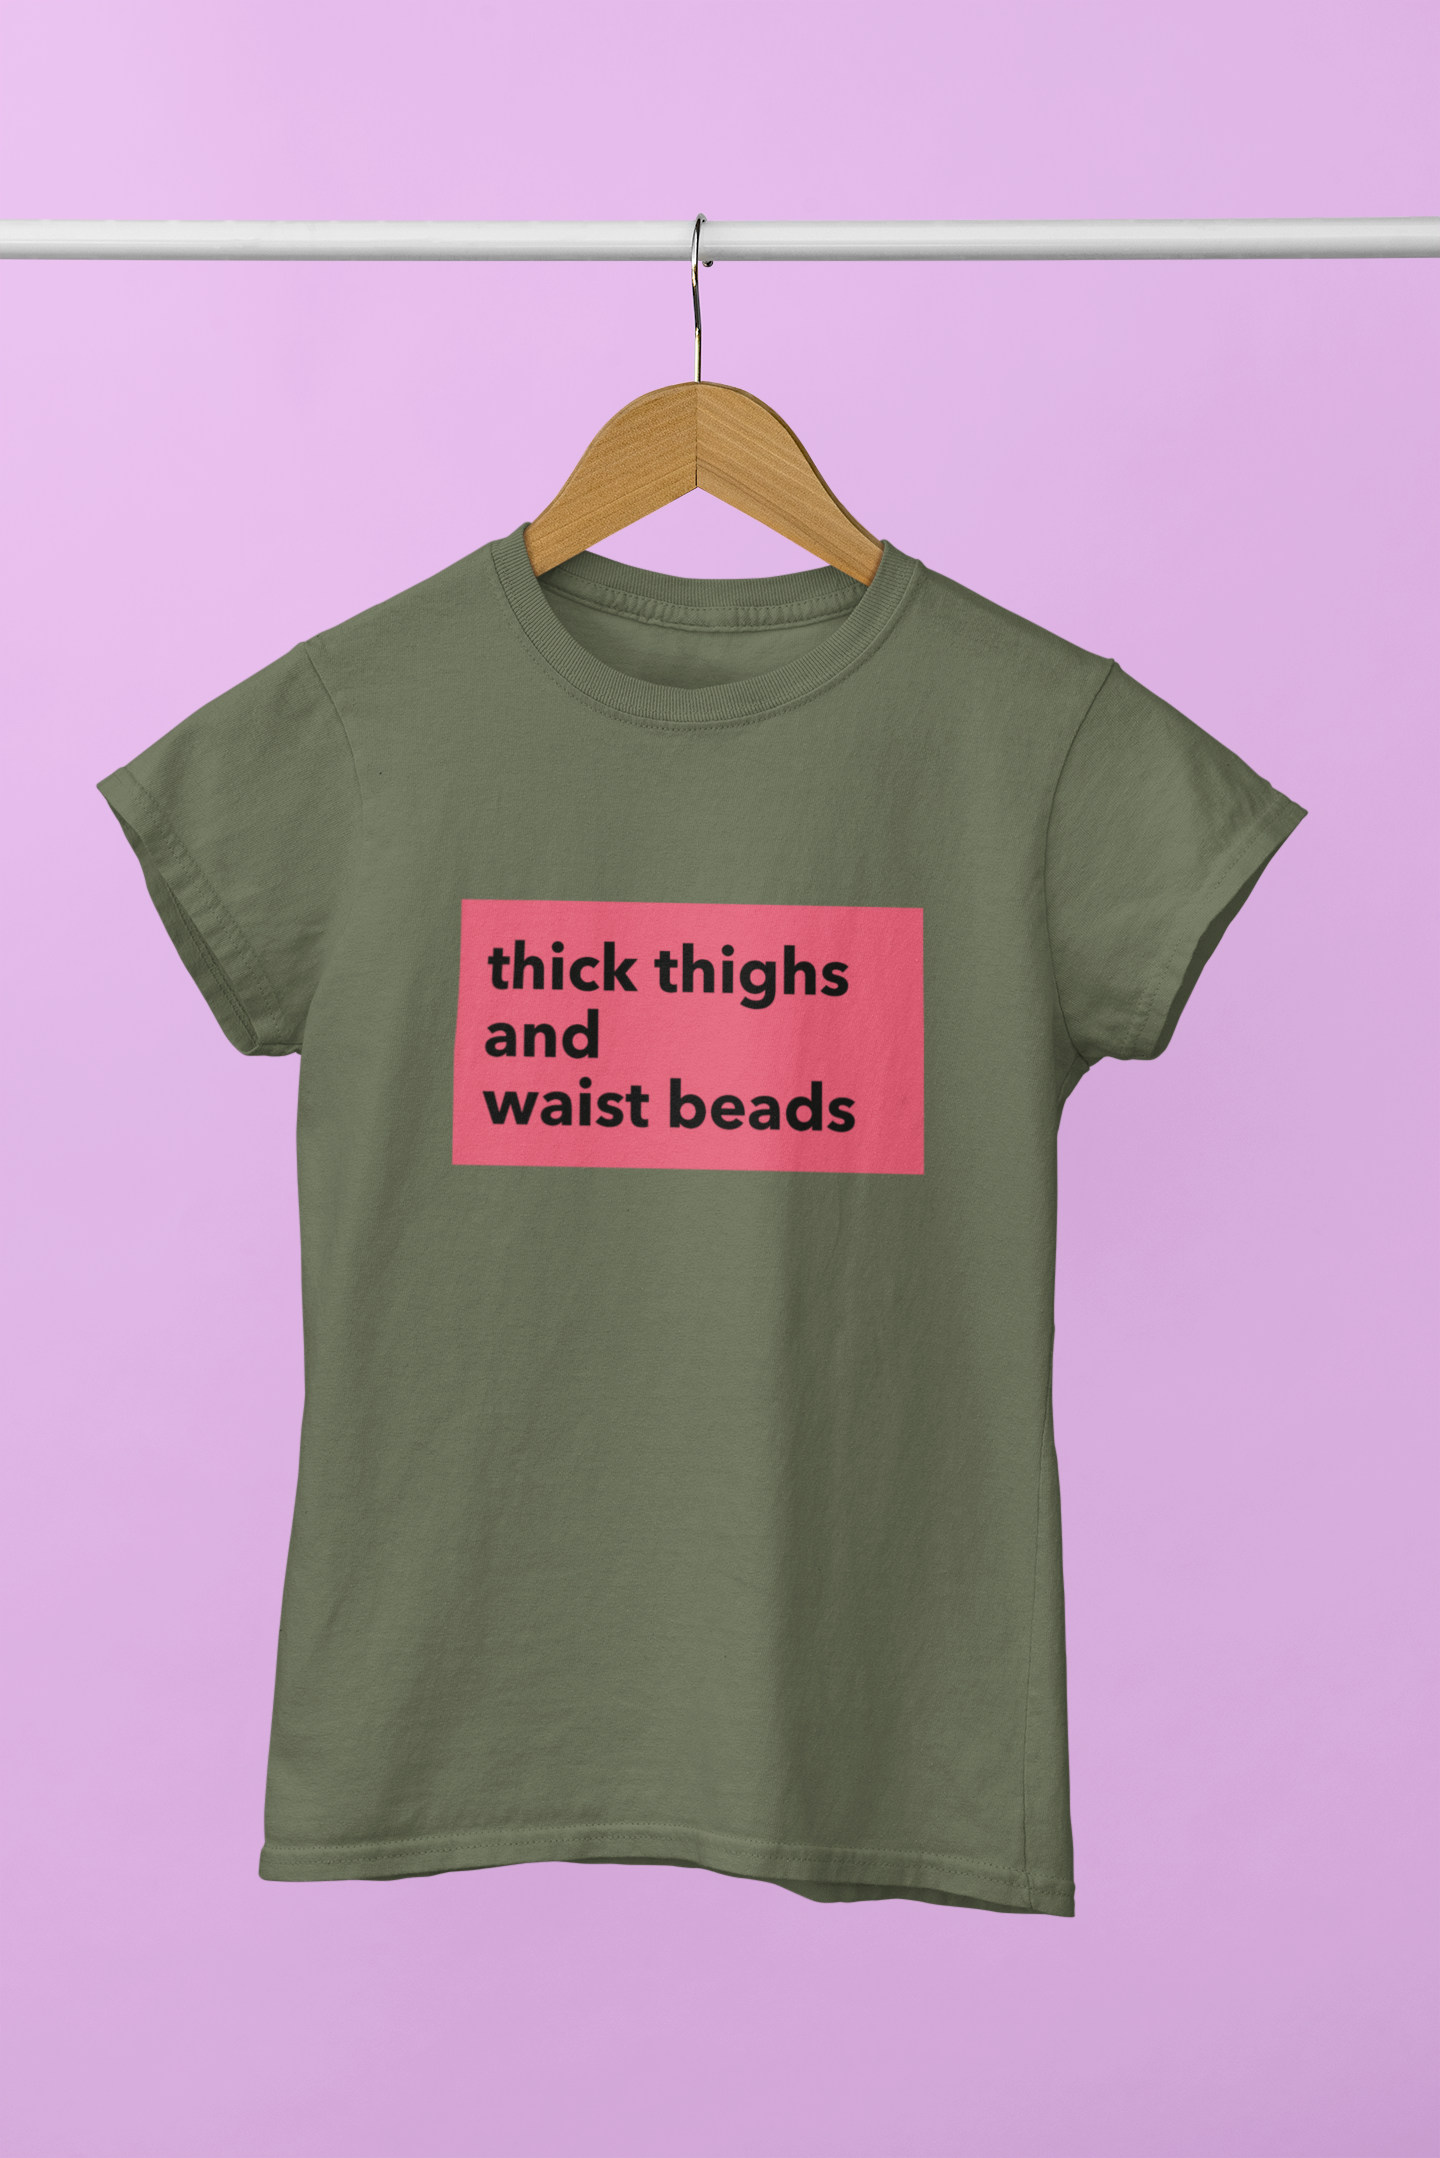 The Thick Thighs Tee